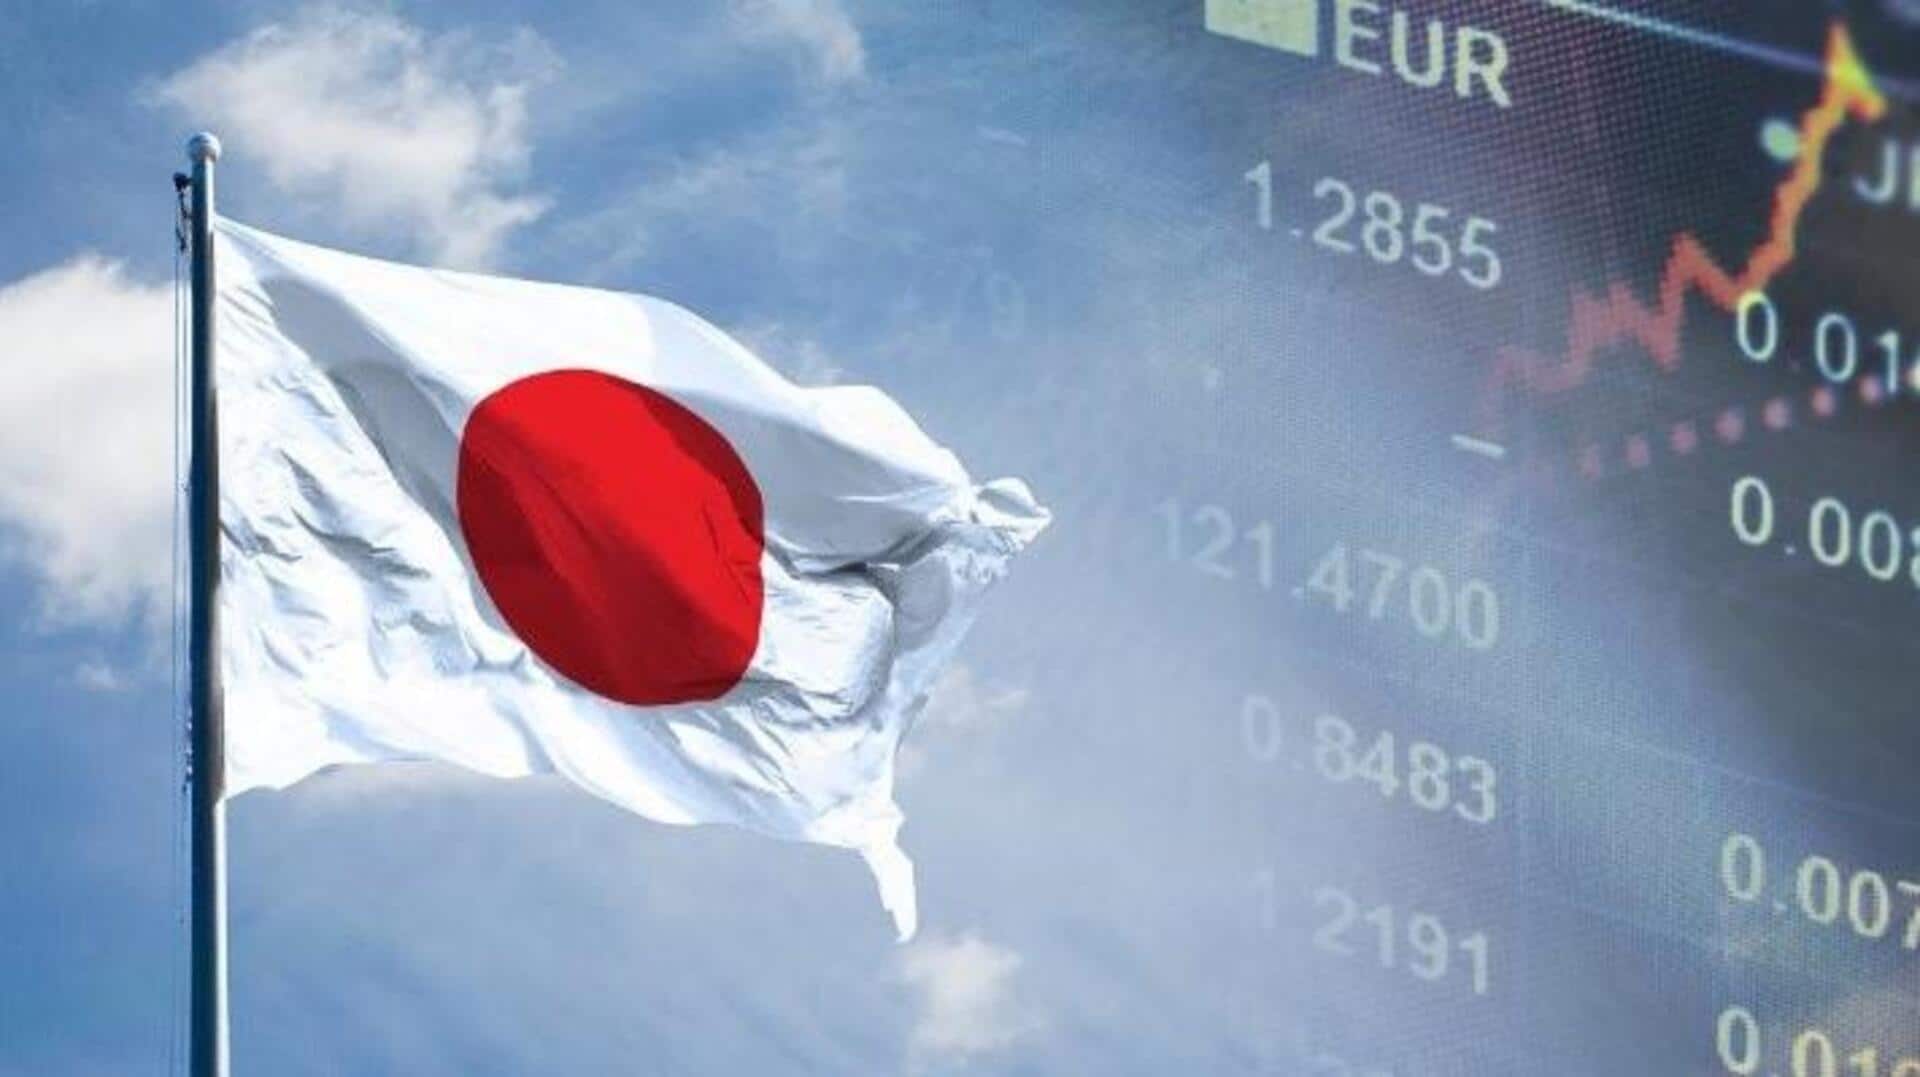 For first time in 17 years, Japan increases interest rates